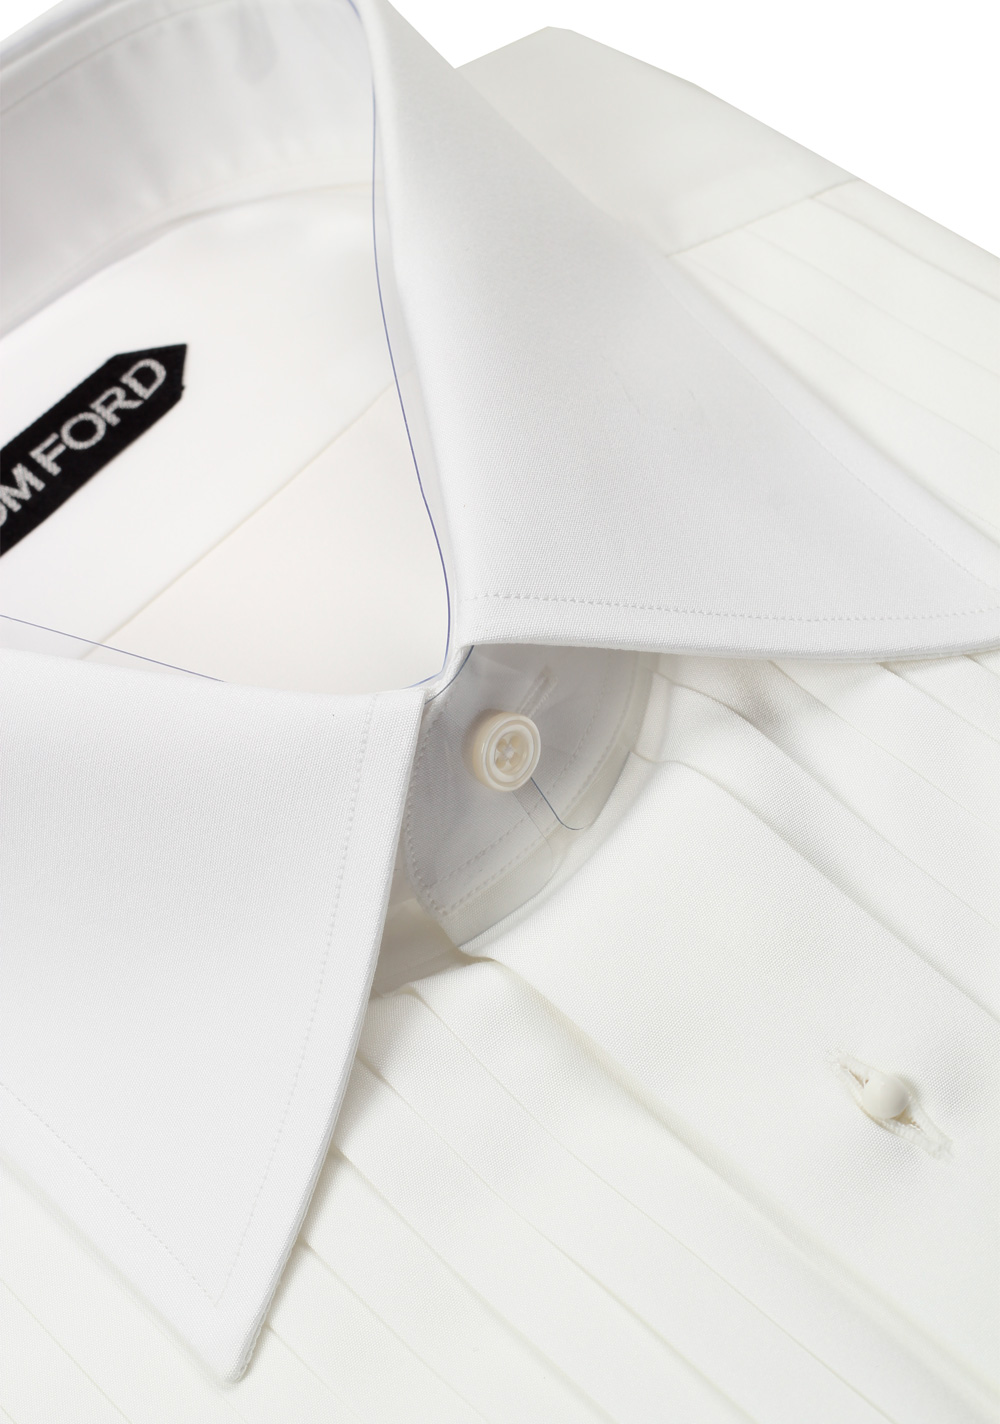 TOM FORD Solid White Signature Tuxedo Shirt With French Cuffs Slim Fit | Costume Limité